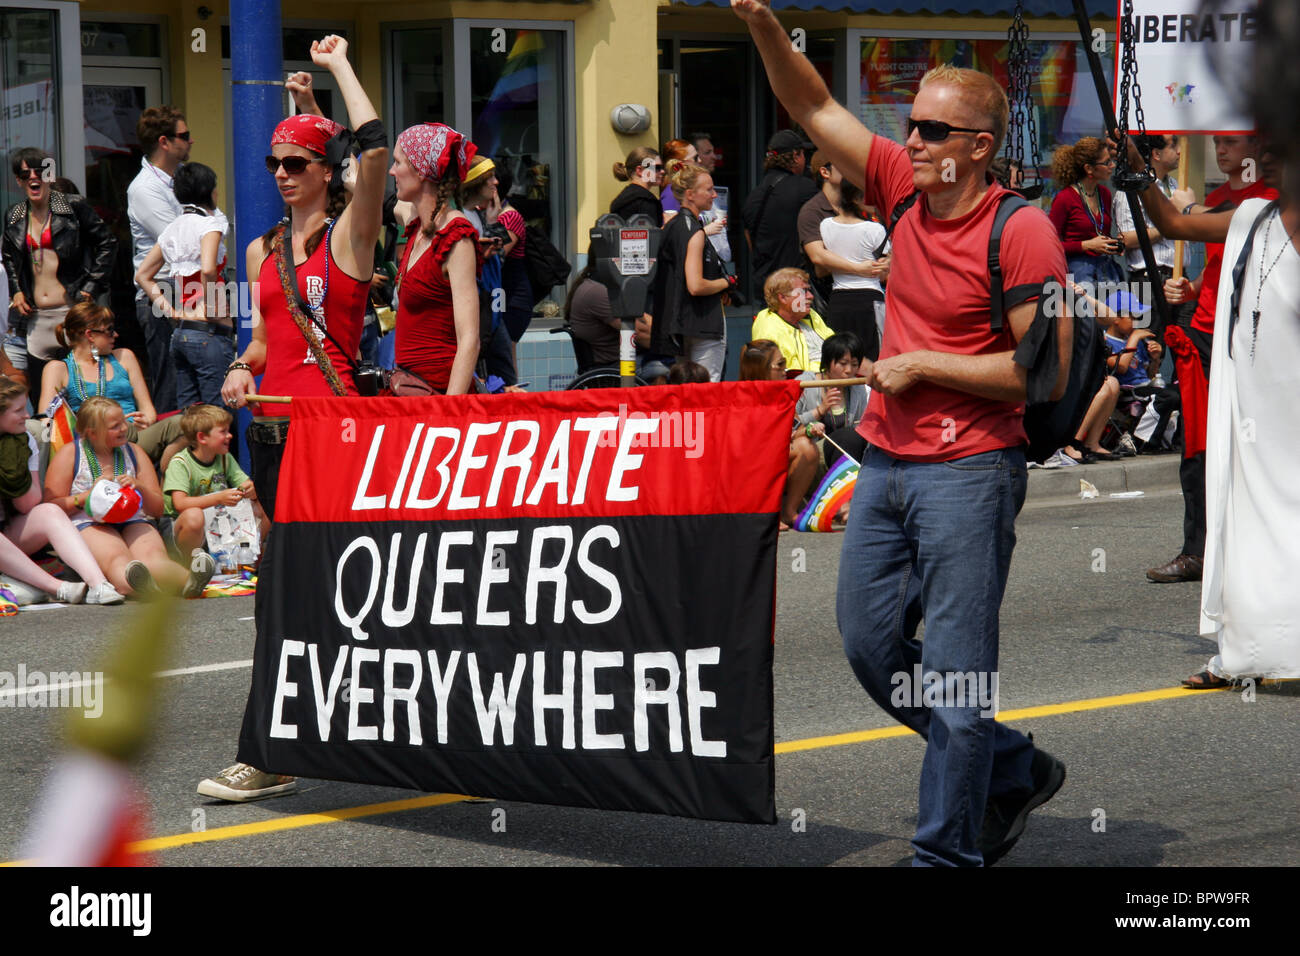 Liberate Queers Everywhere protestors at Gay Pride march, Vancouver, British Columbia, Canada Stock Photo